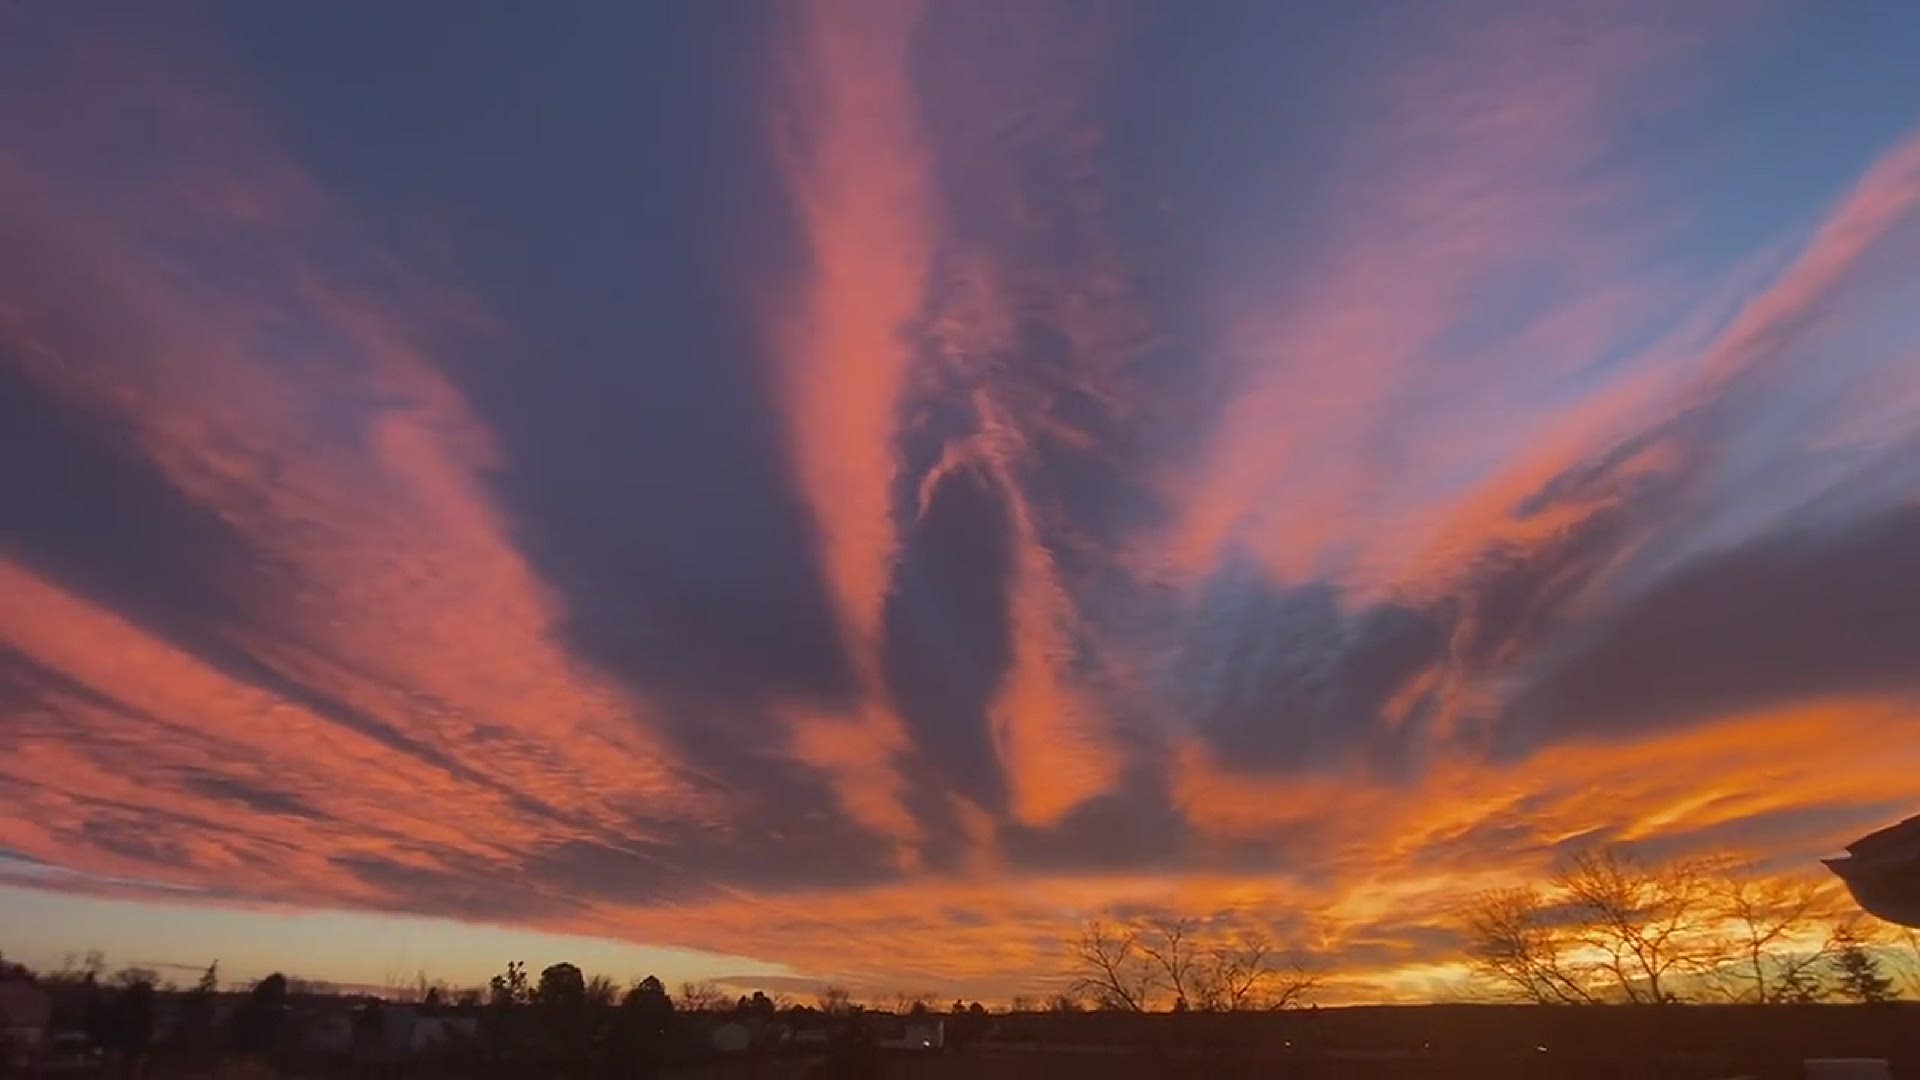 Westminster sunrise. Video: Michelle Koster
Credit: Michelle koster